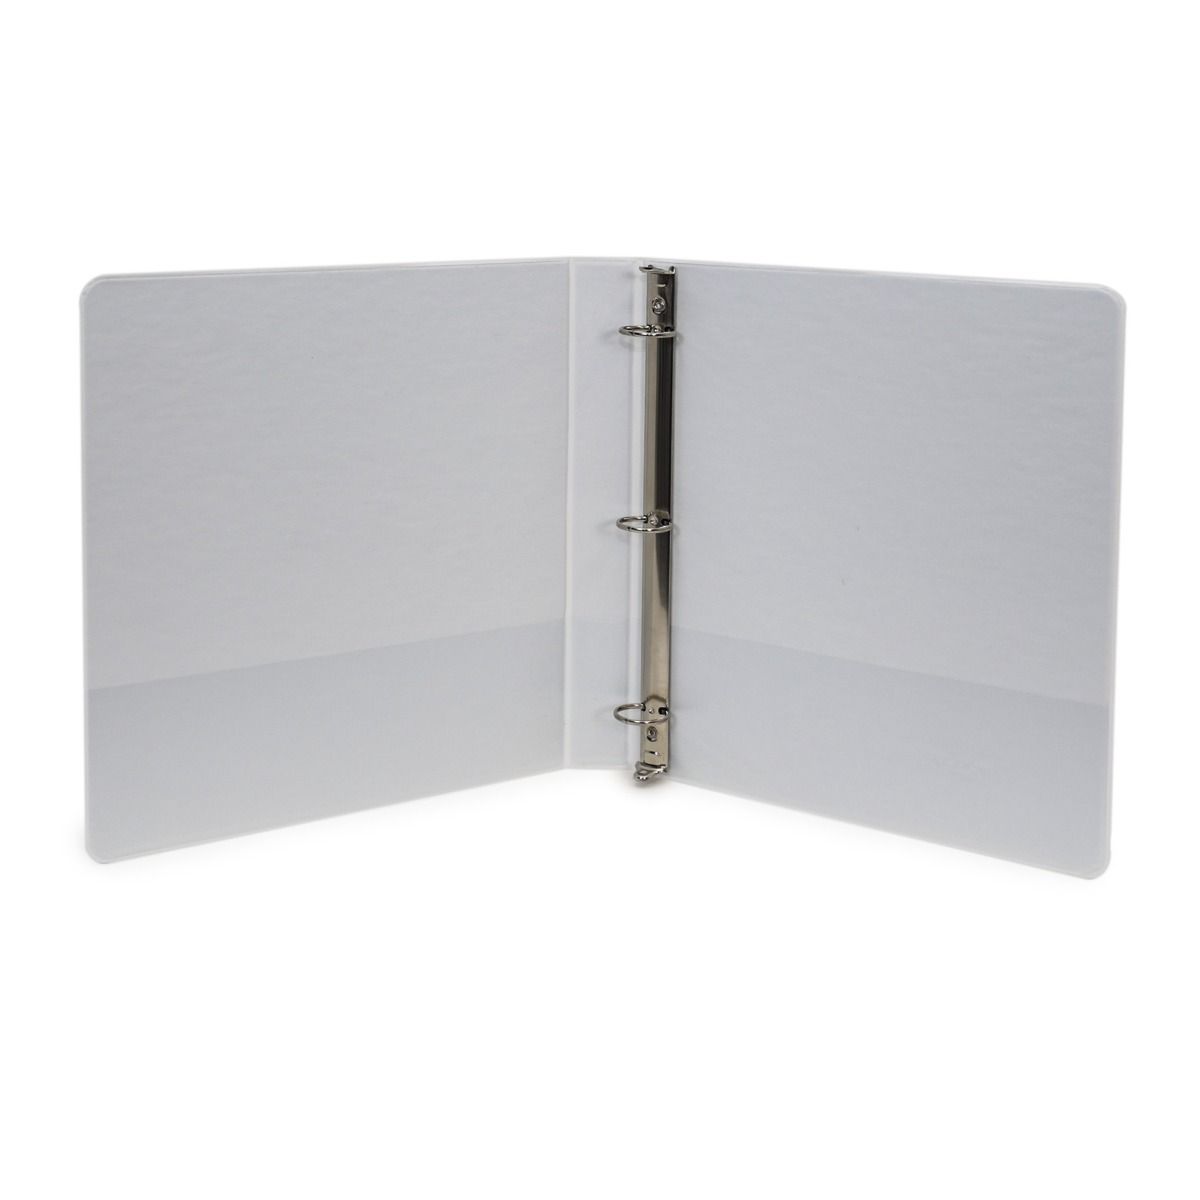 Buy White Letter Size Clear View 3-Ring Binders